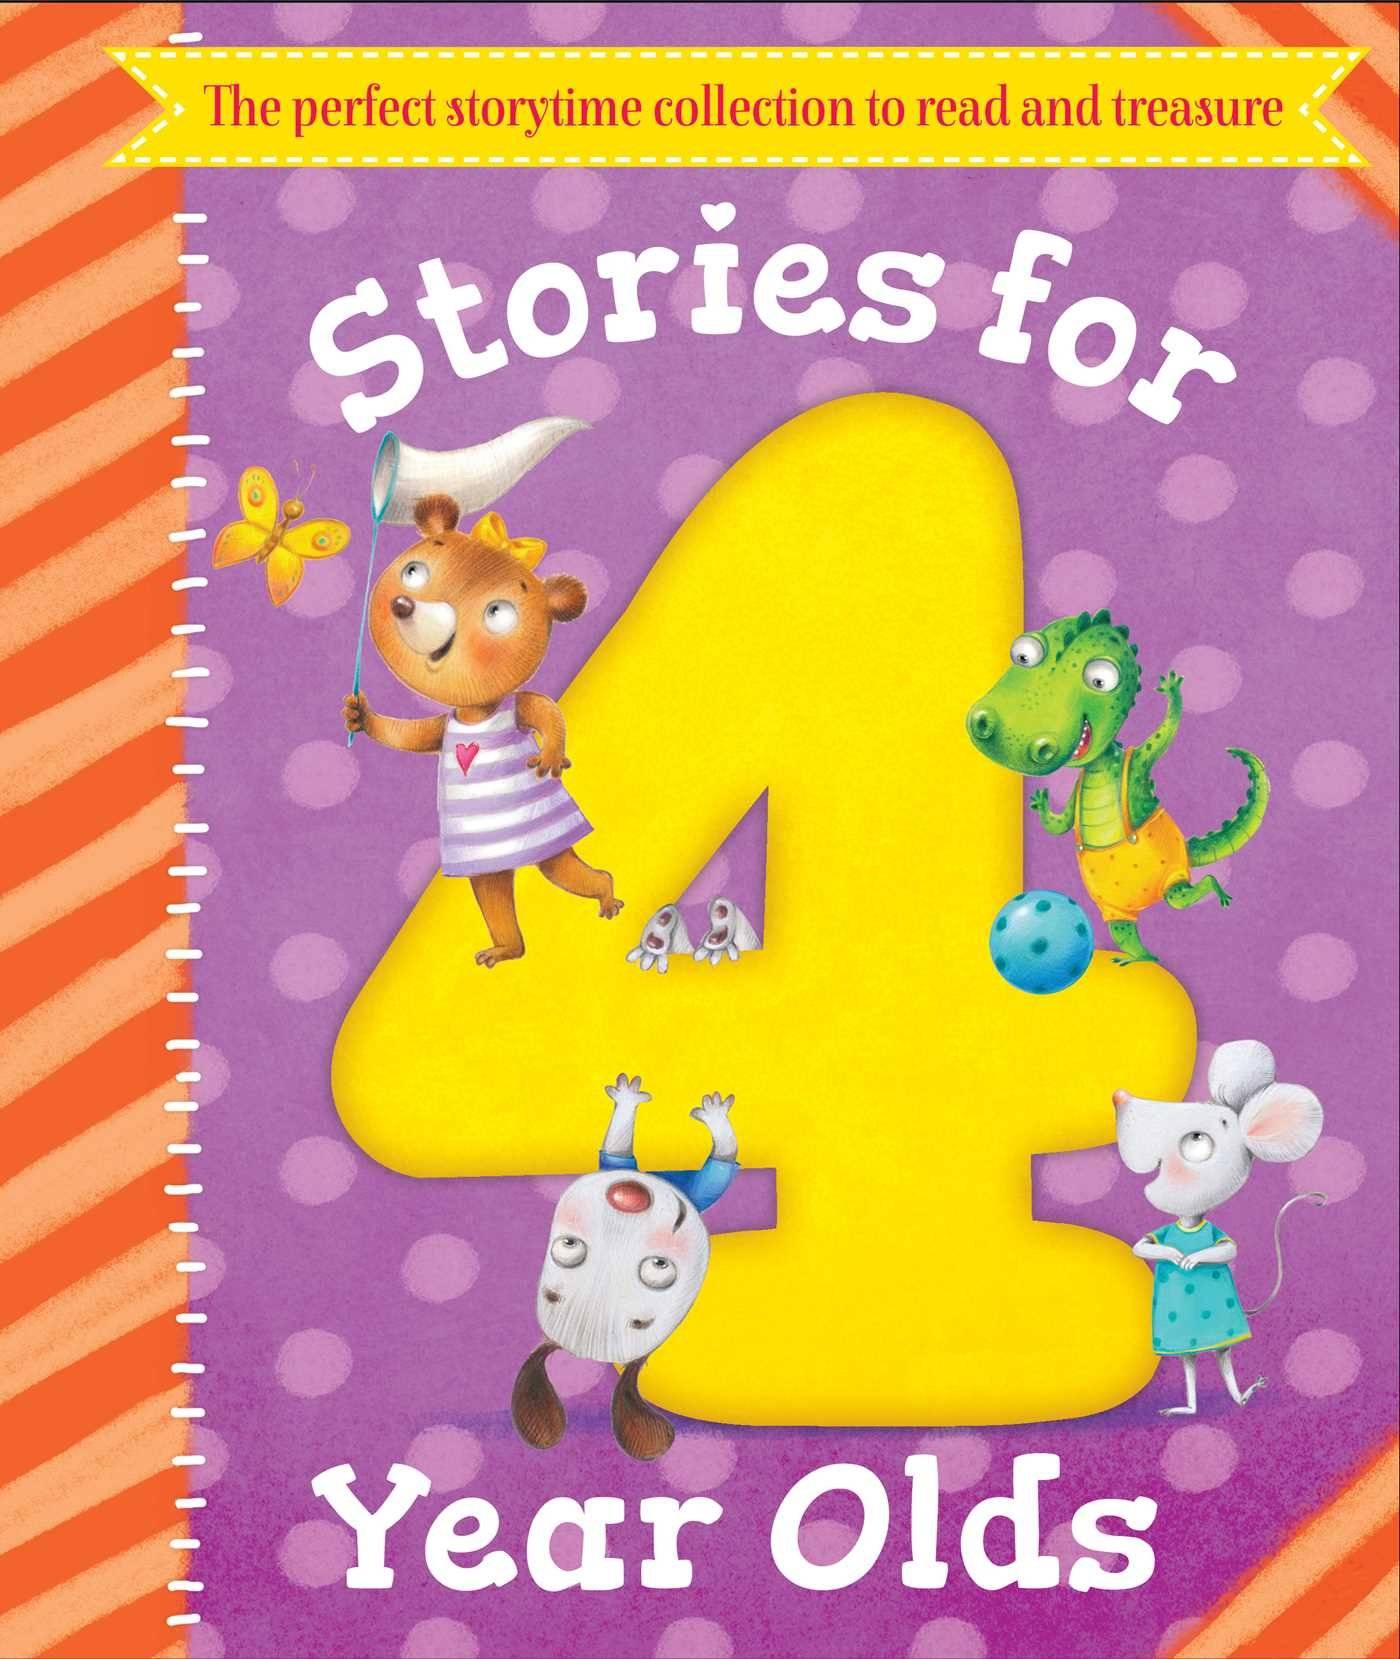 IMG : Stories for 4 year olds